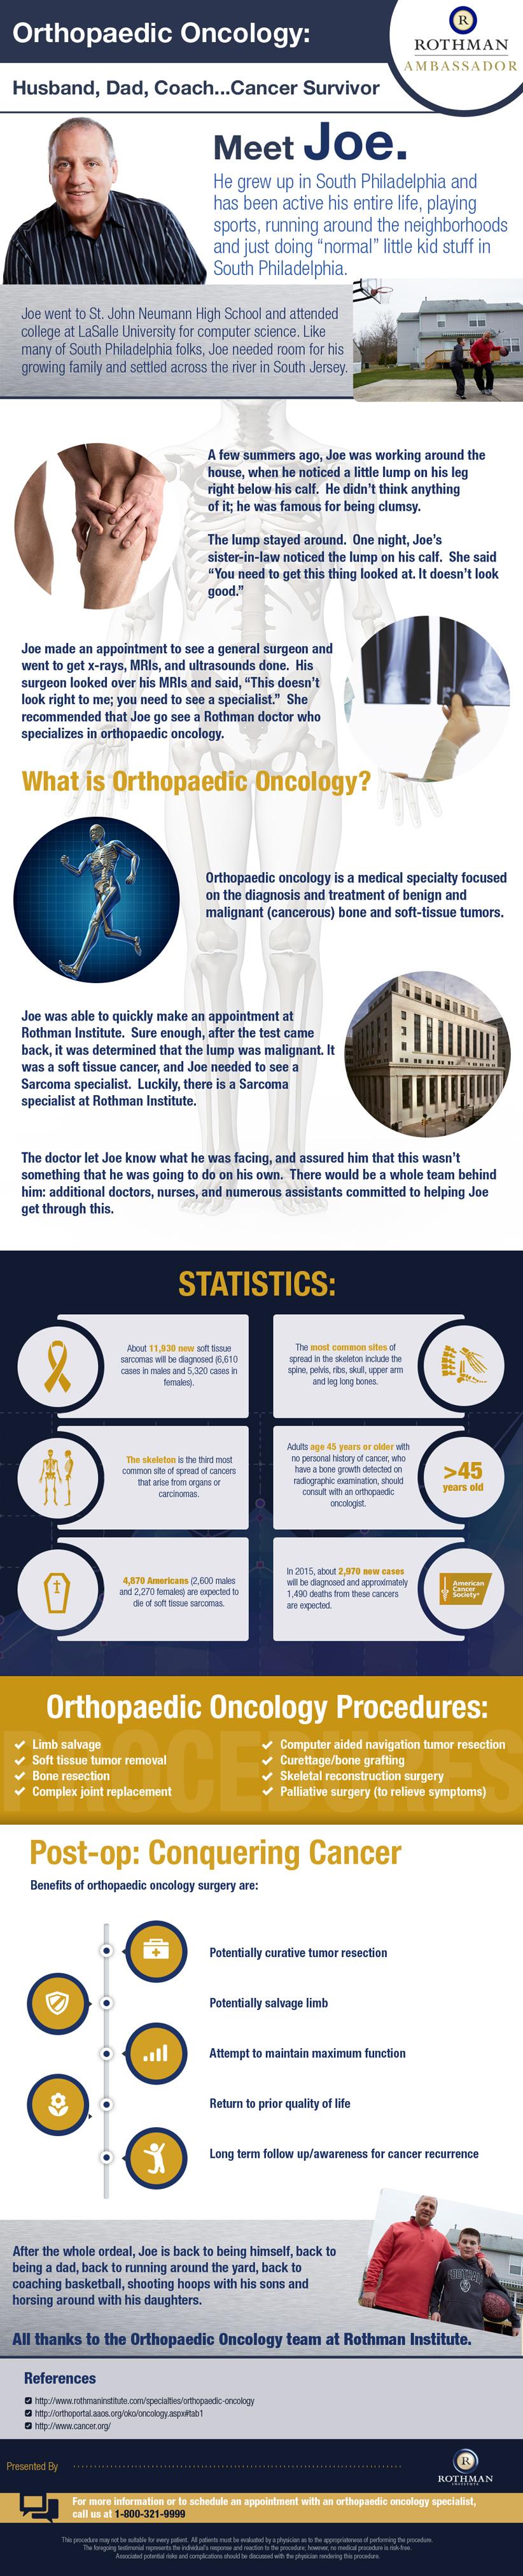 Infographic 10: Orthopaedic Oncology